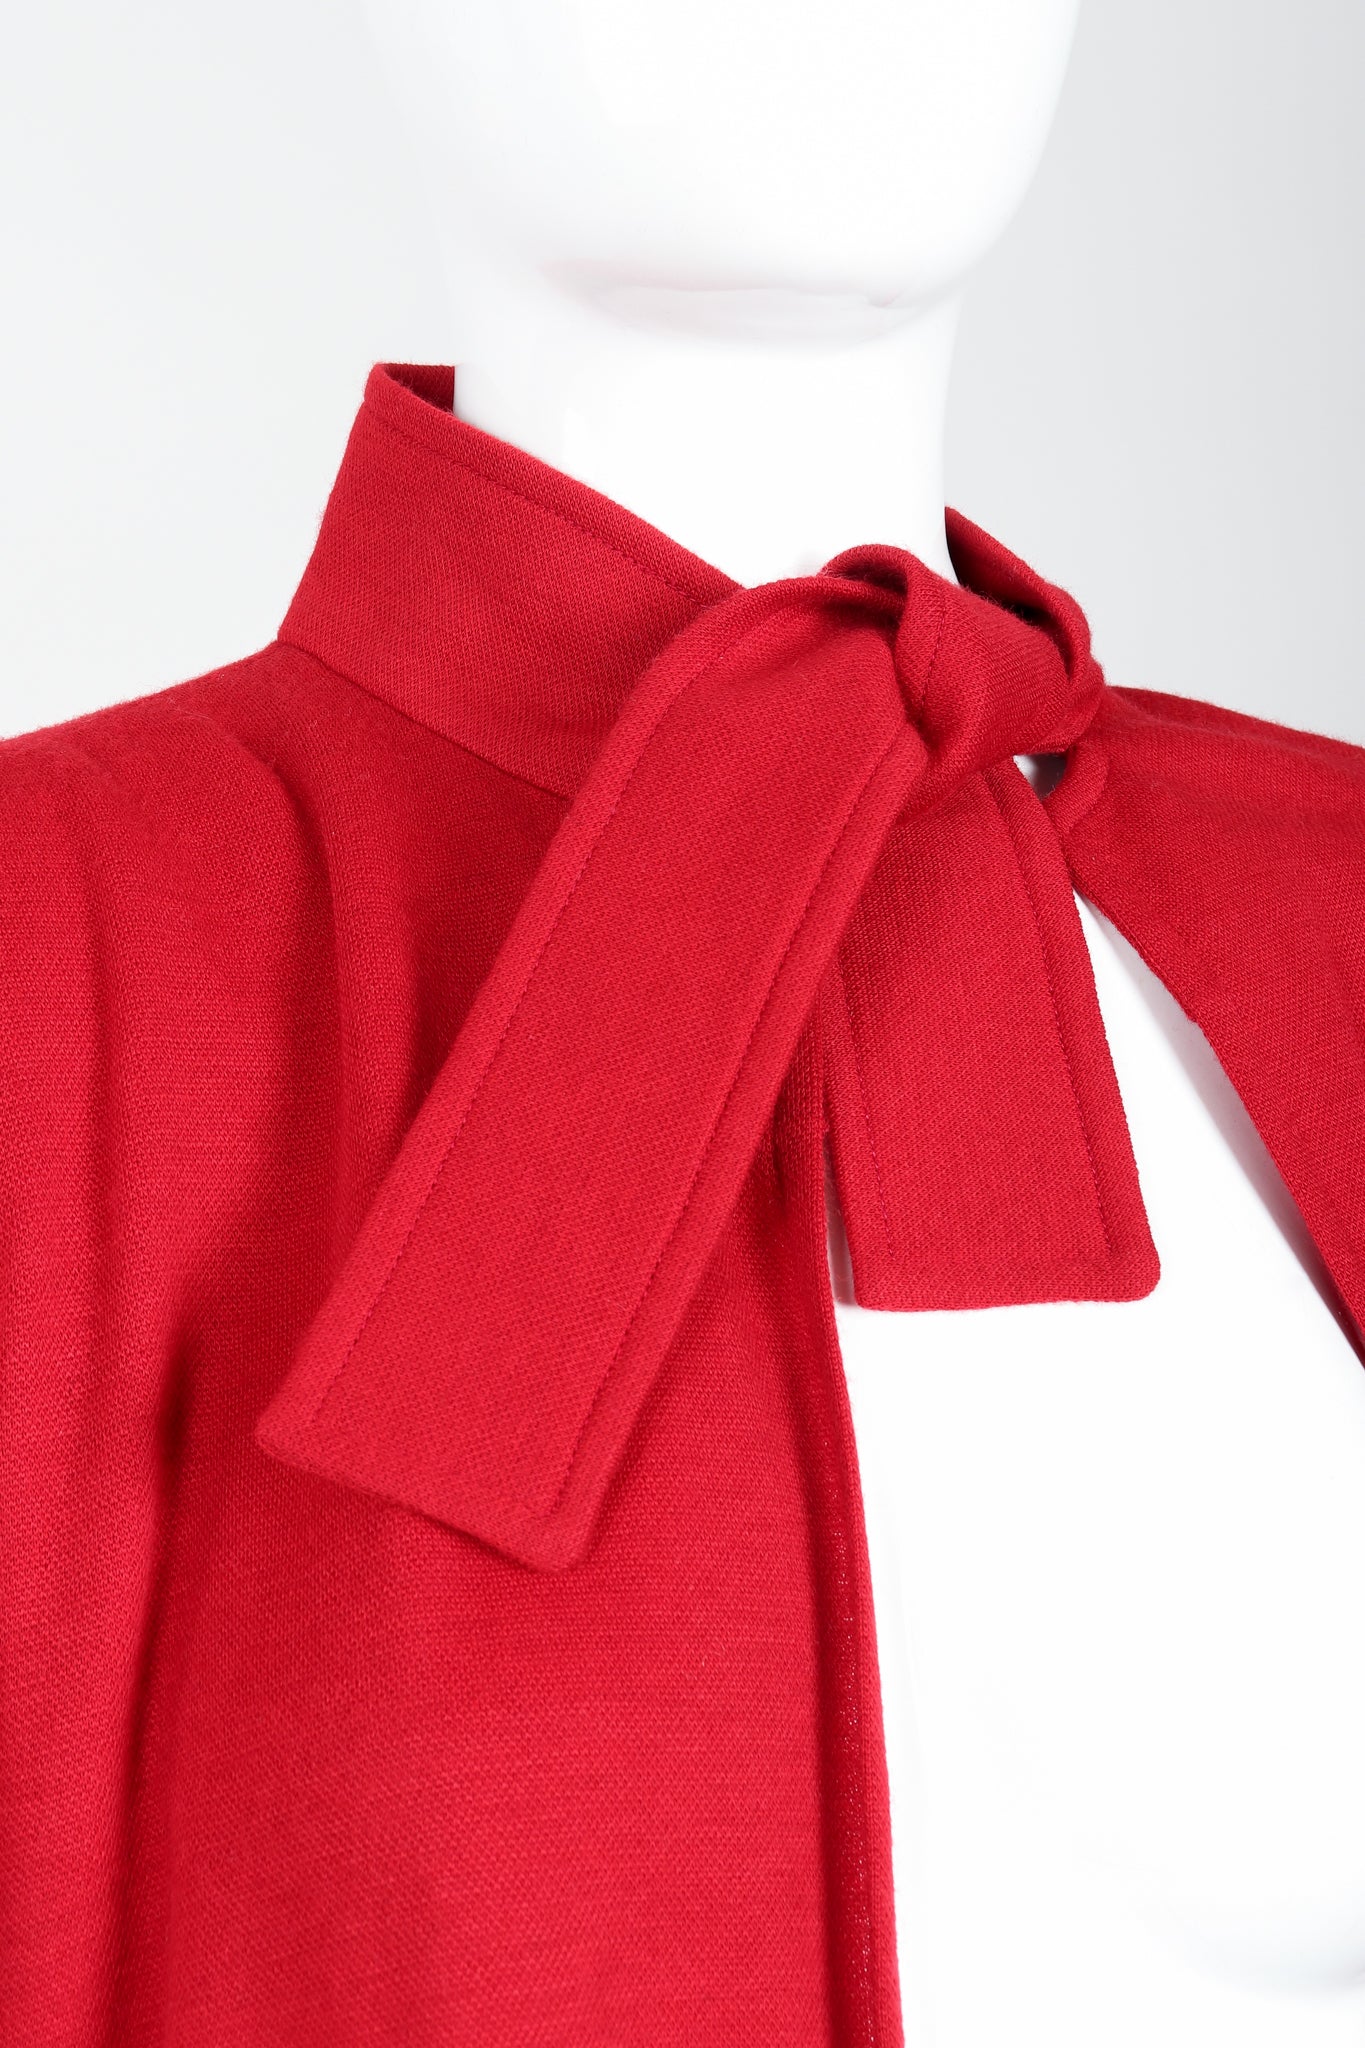 Vintage Sonia Rykiel Red Knit Cape Coat & Pant Set on mannequin neck tie at Recess